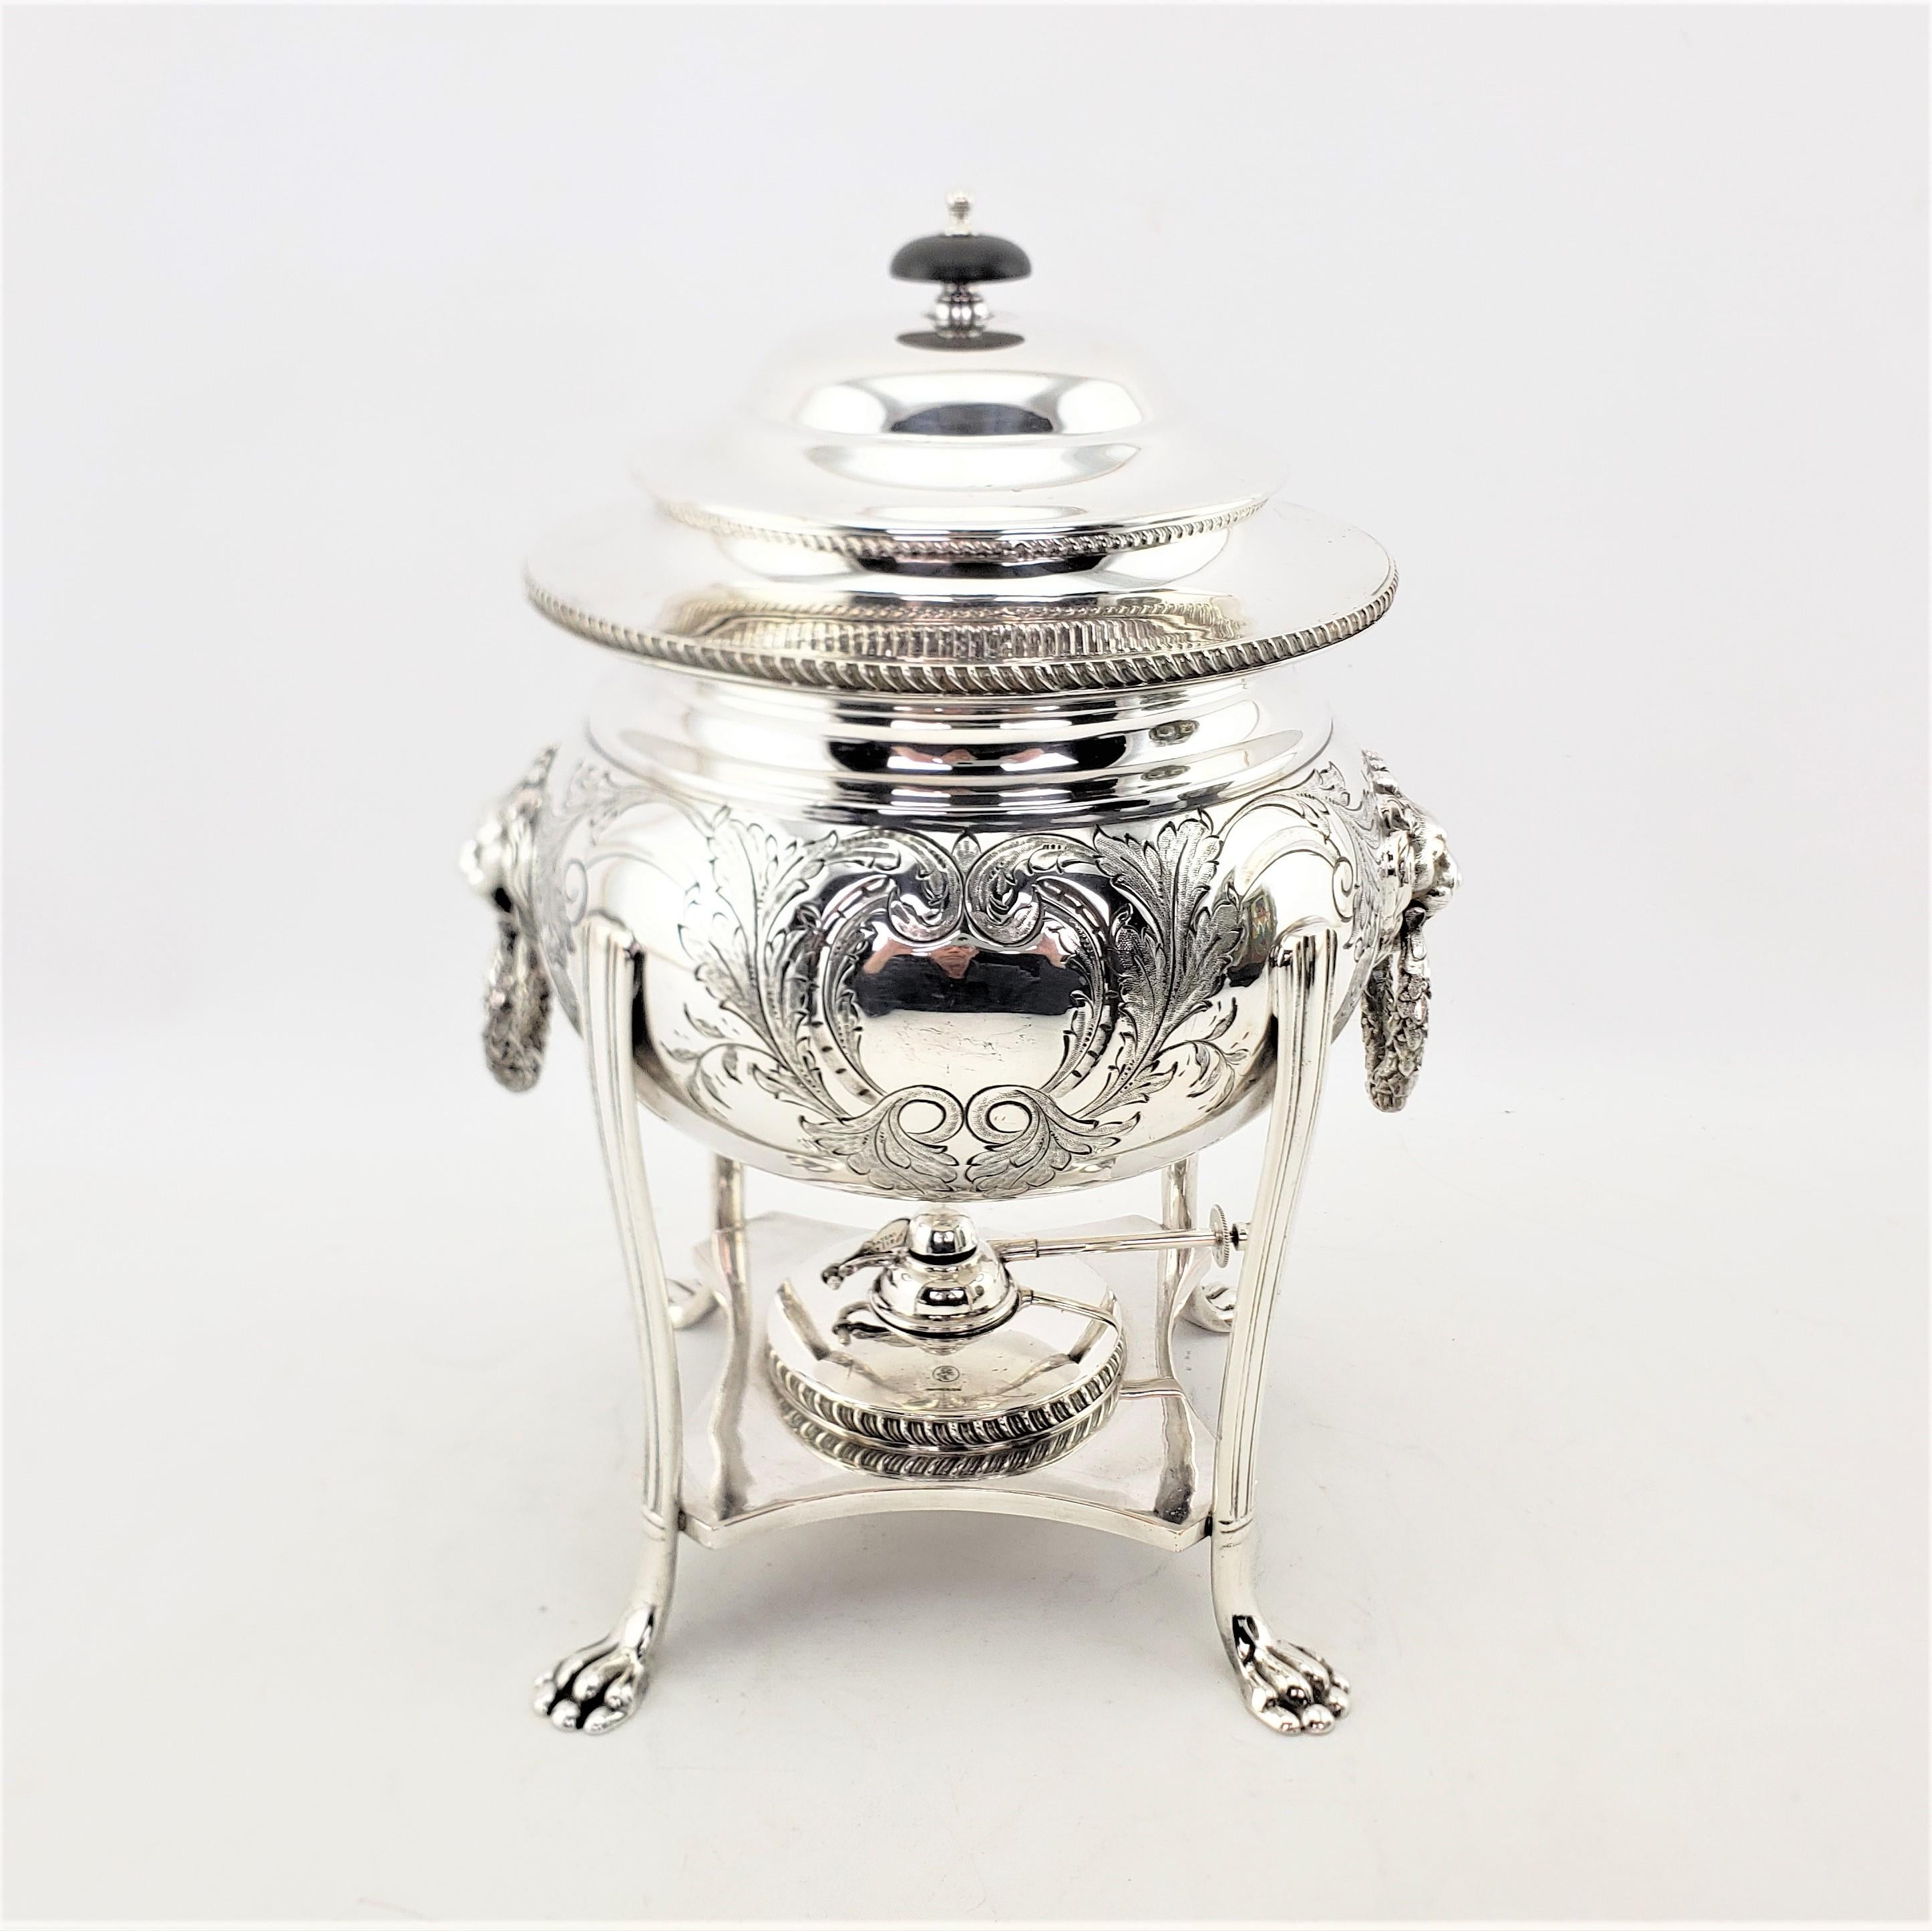 20th Century Antique English Silver Plated Tea or Hot Water Urn with Lion Mounts & Engraving